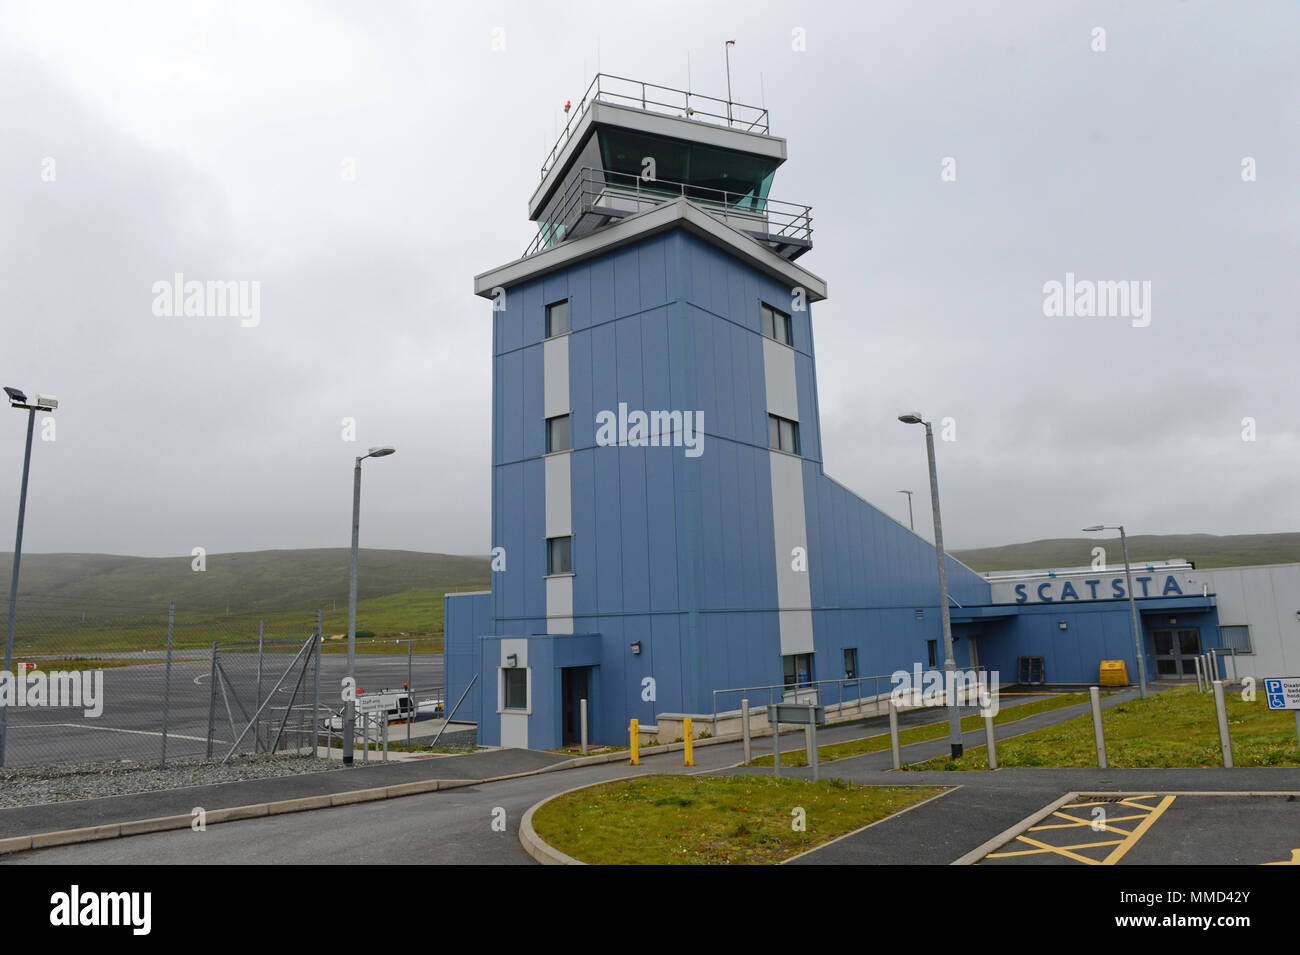 Scatsta airport on the Shetland Islands that support the oil and gas industry by flying workers out to the oil rigs in the north sea Stock Photo